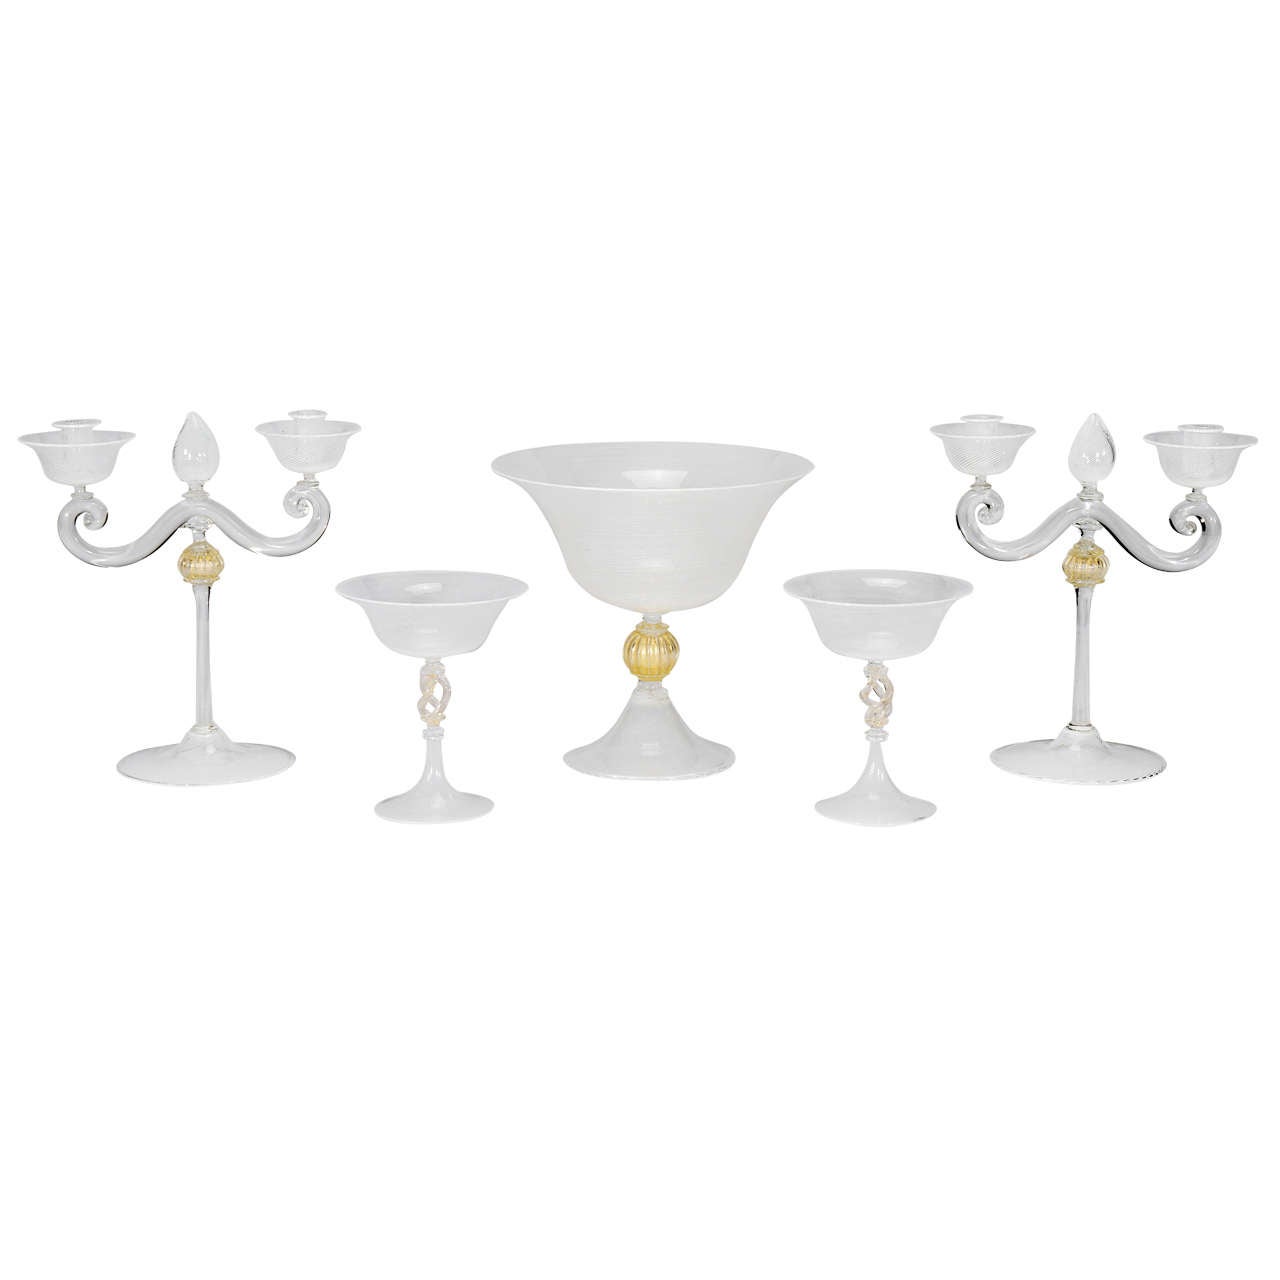 Cenedese, Murano 5 Piece Table Centerpiece Set with White Threading For Sale